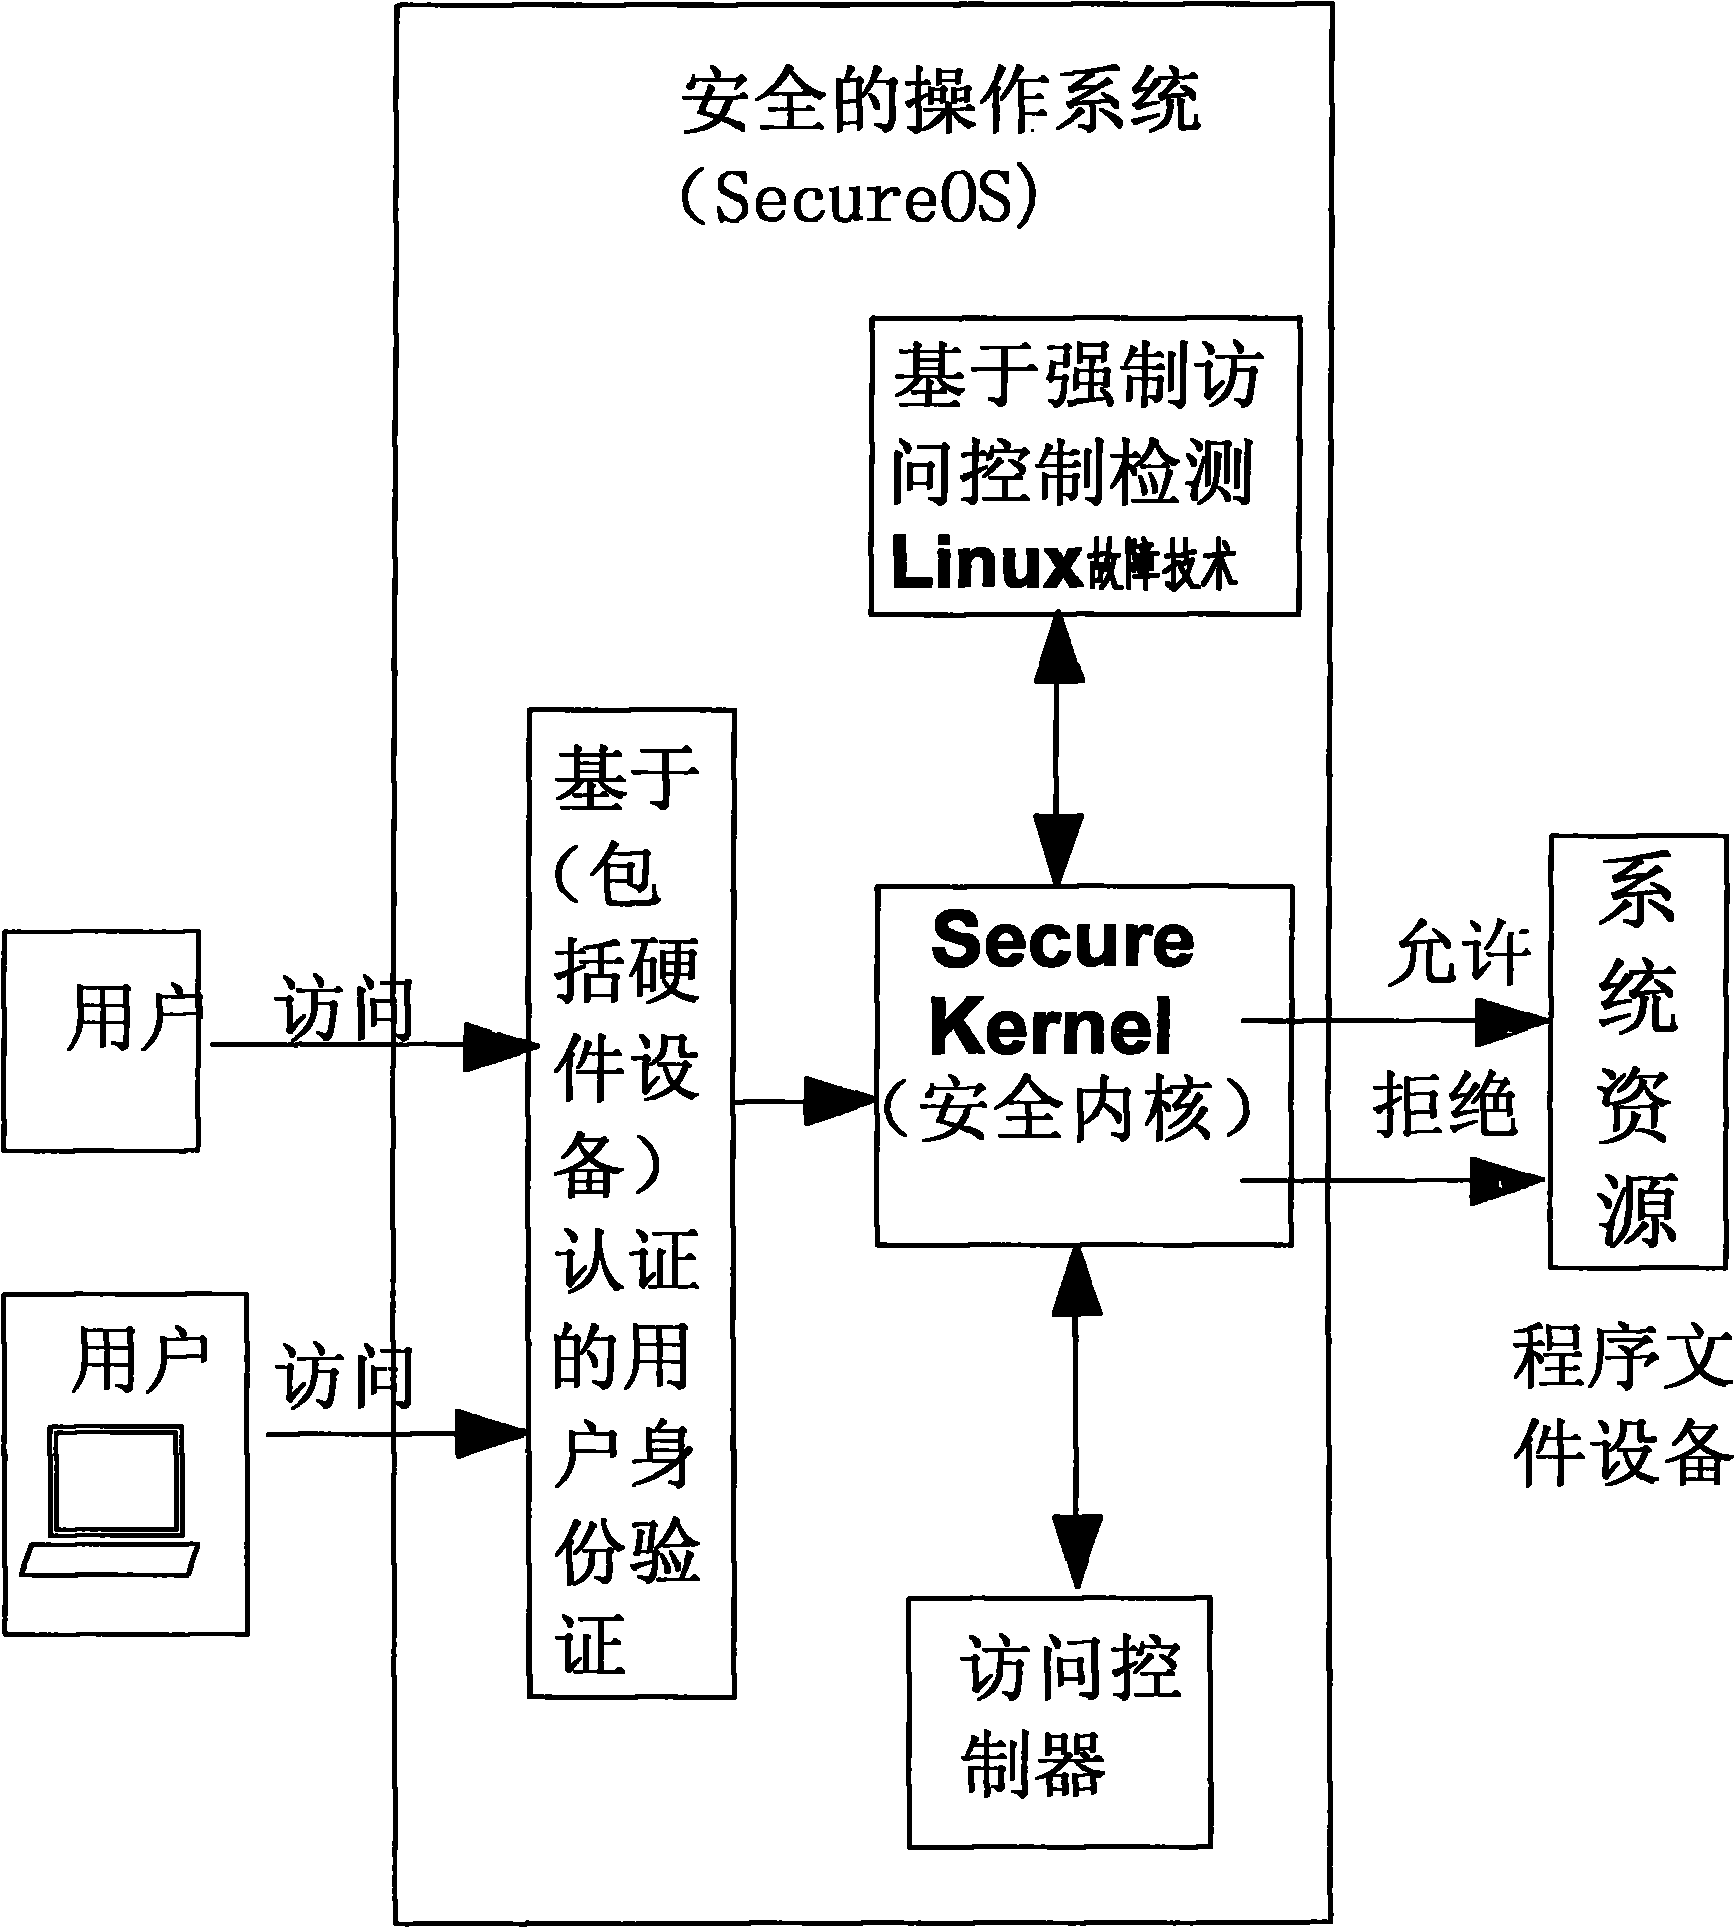 Method for detecting Solaris system fault by utilizing mandatory access control